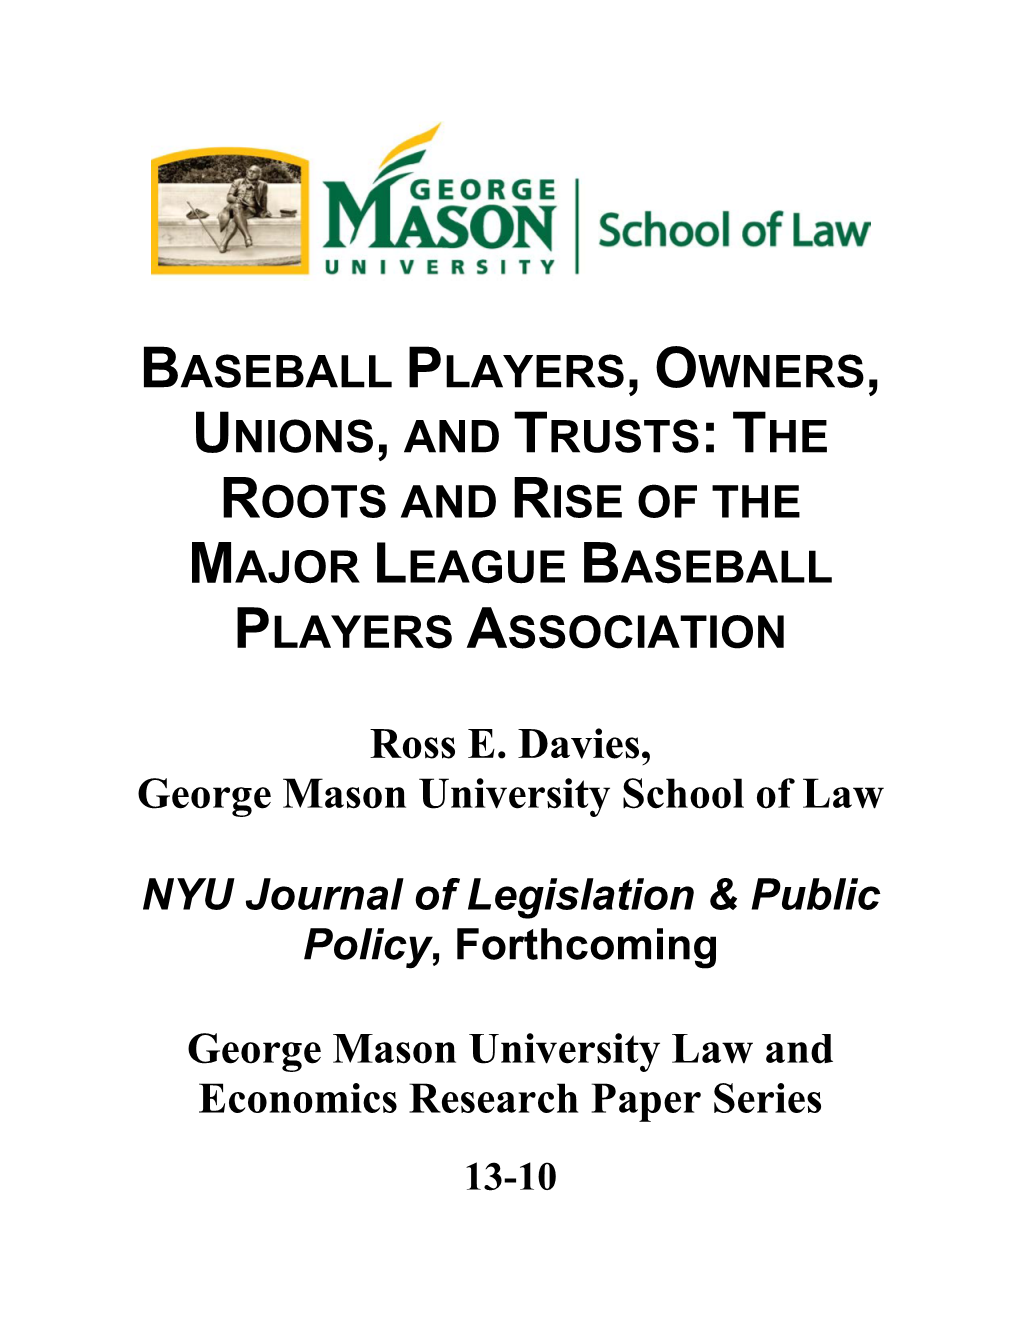 Ross E. Davies, Baseball Players, Owners, Unions, and Trusts, 16 NYU Journal of Legislation and Public Policy (Forthcoming 2013)